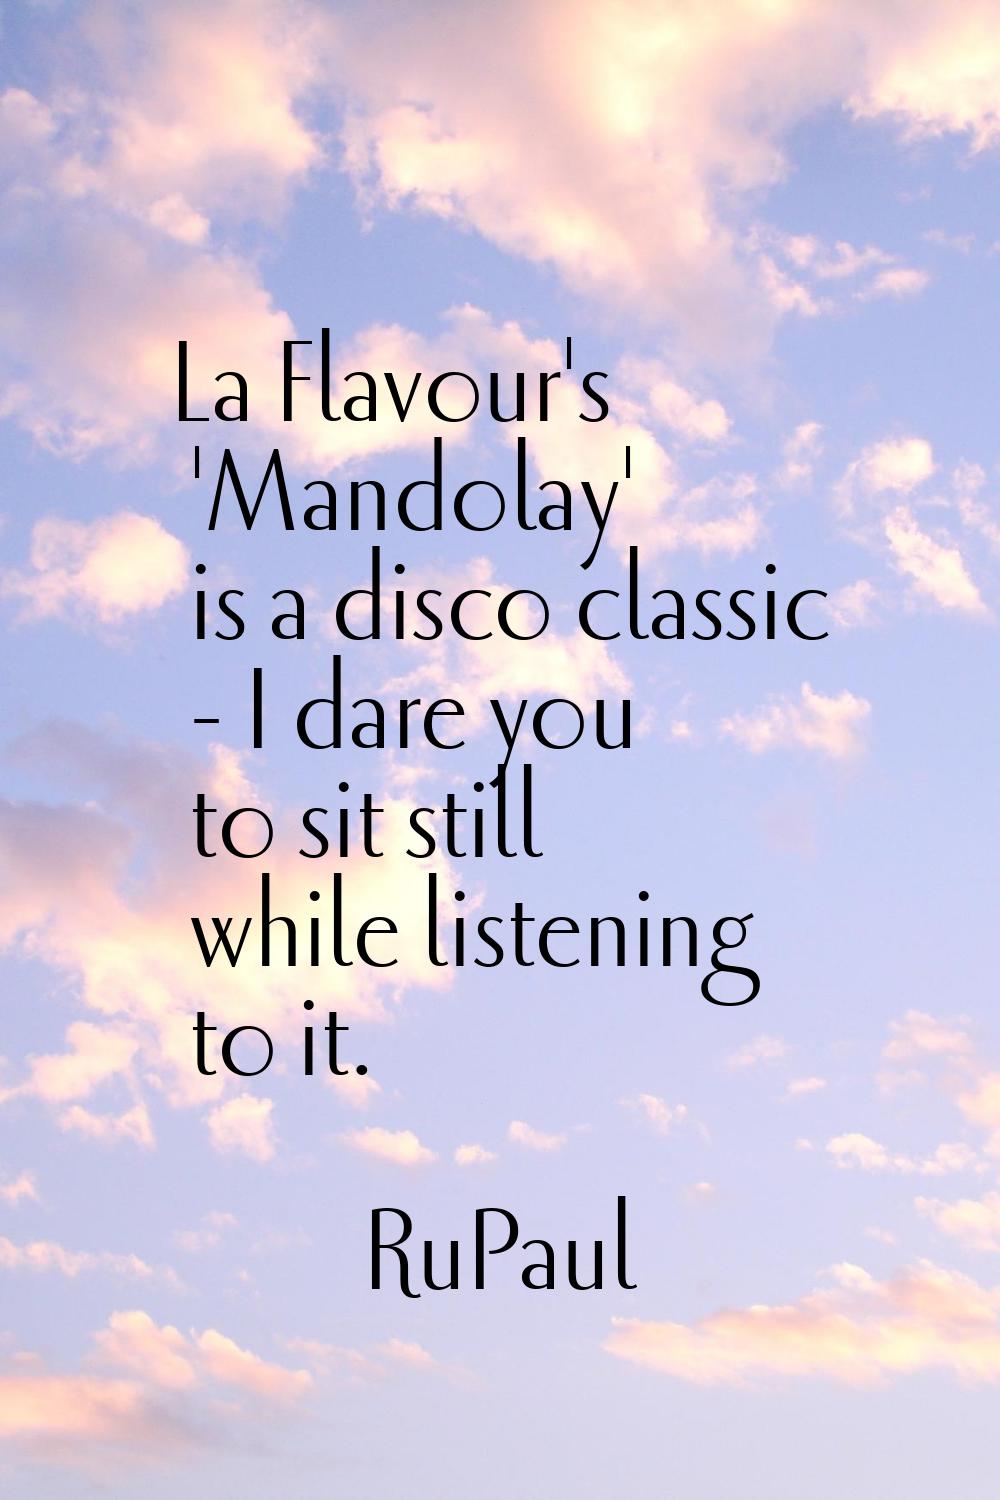 La Flavour's 'Mandolay' is a disco classic - I dare you to sit still while listening to it.